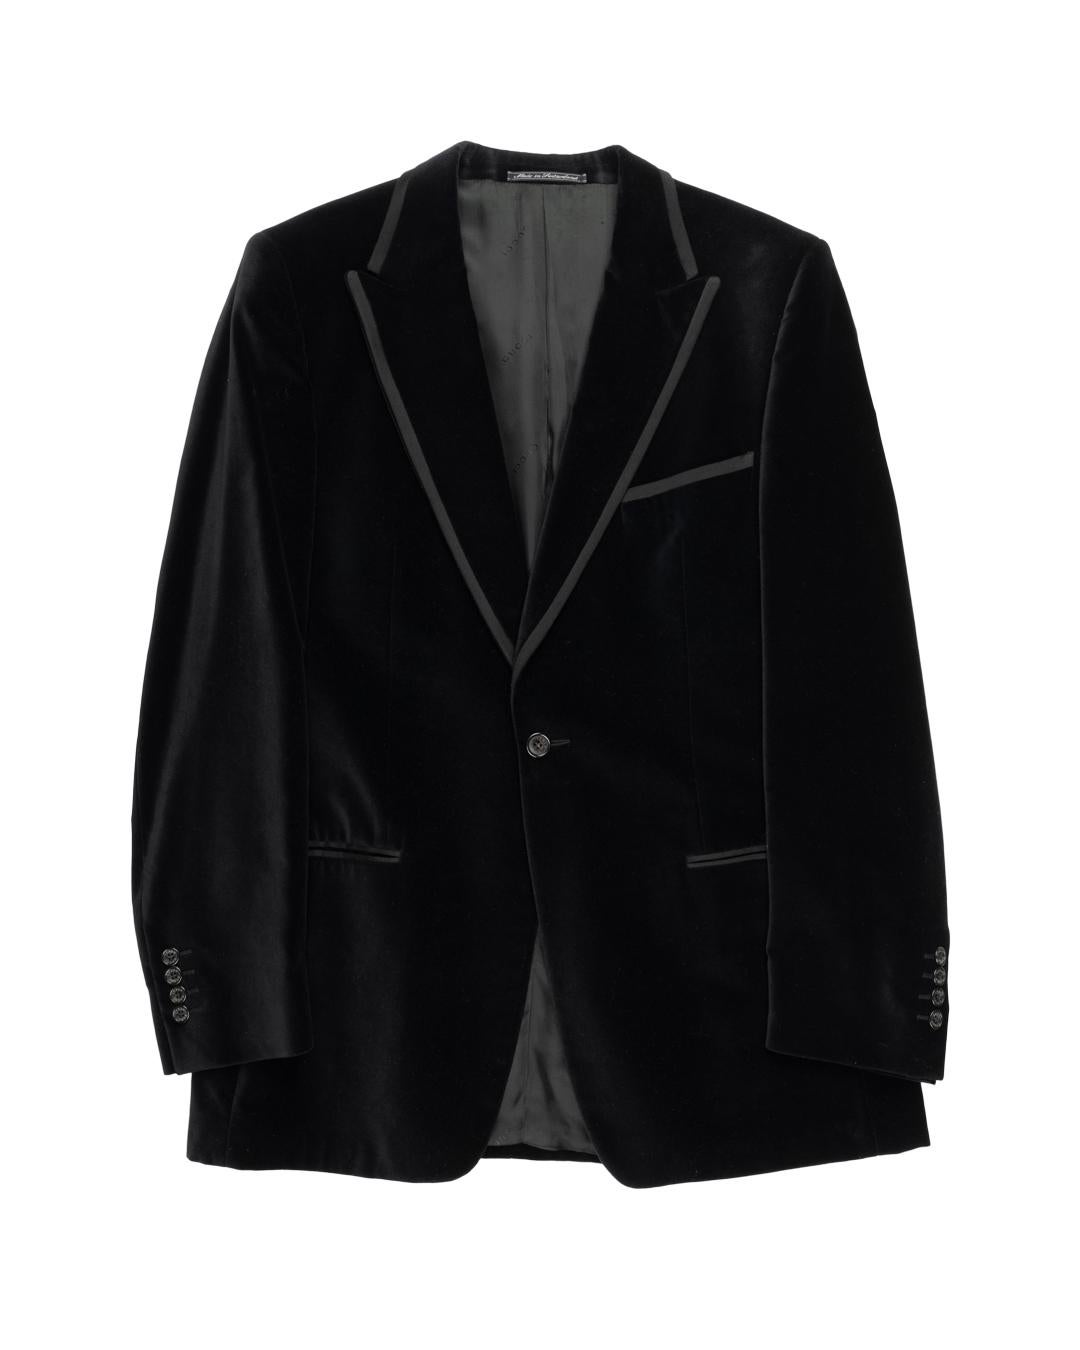 Gucci by Tom Ford AW1996 Velvet Smoking Tuxedo In Excellent Condition For Sale In Beverly Hills, CA